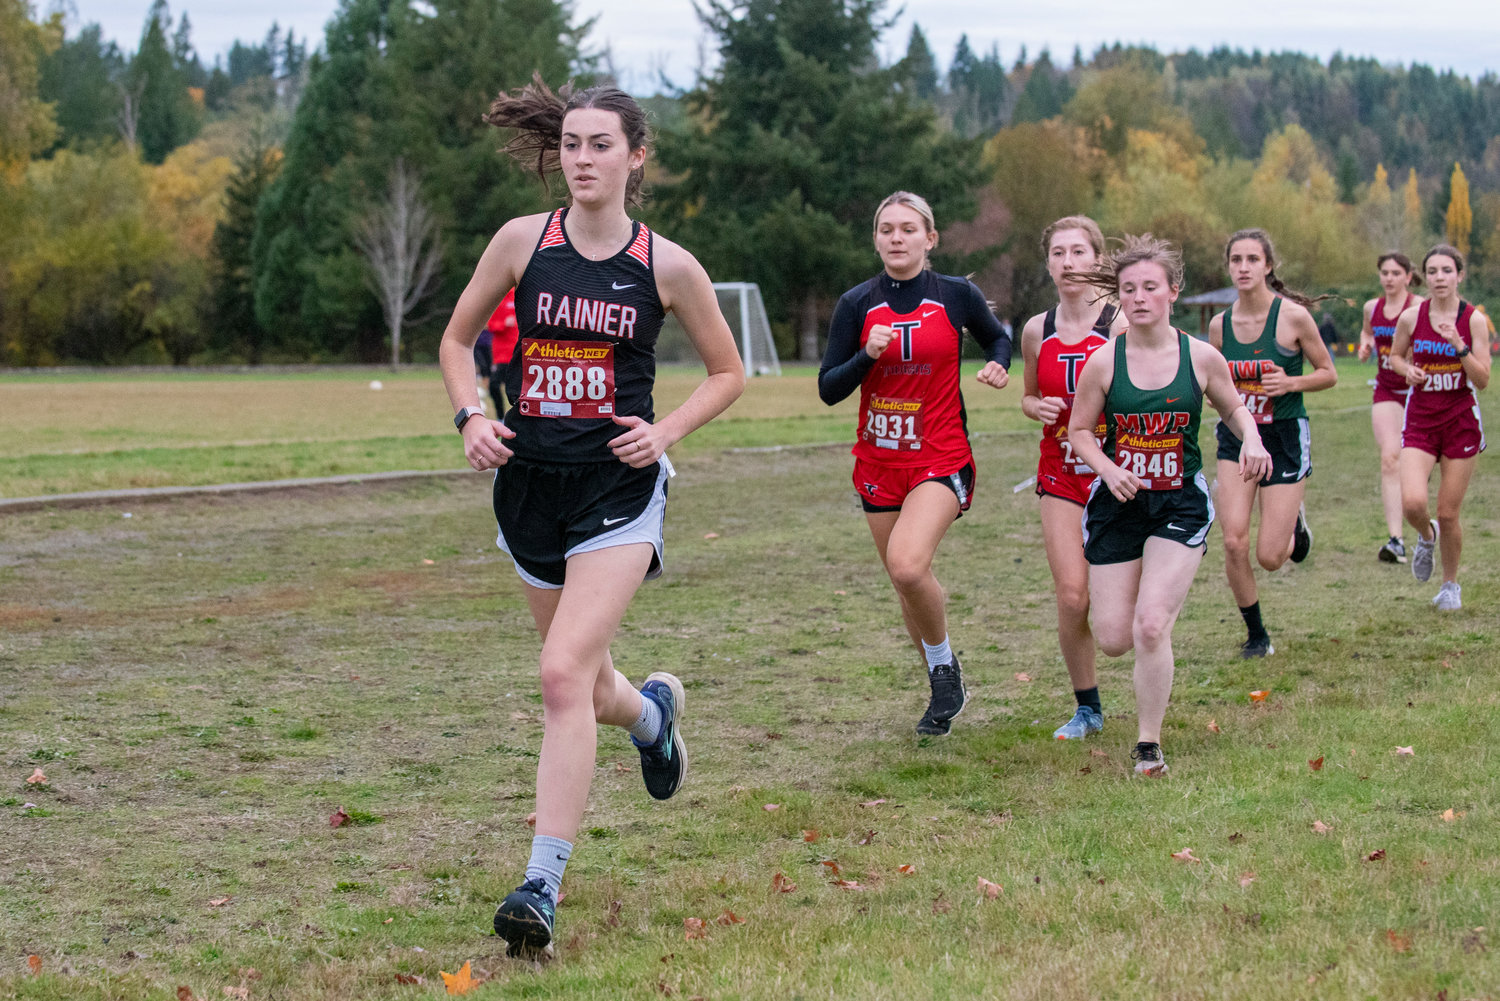 Rainier senior Faith Boesch (2888) leads a grouping of runners at the 2B Central League cross country championships in Onalaska on Oct. 21, 2021.